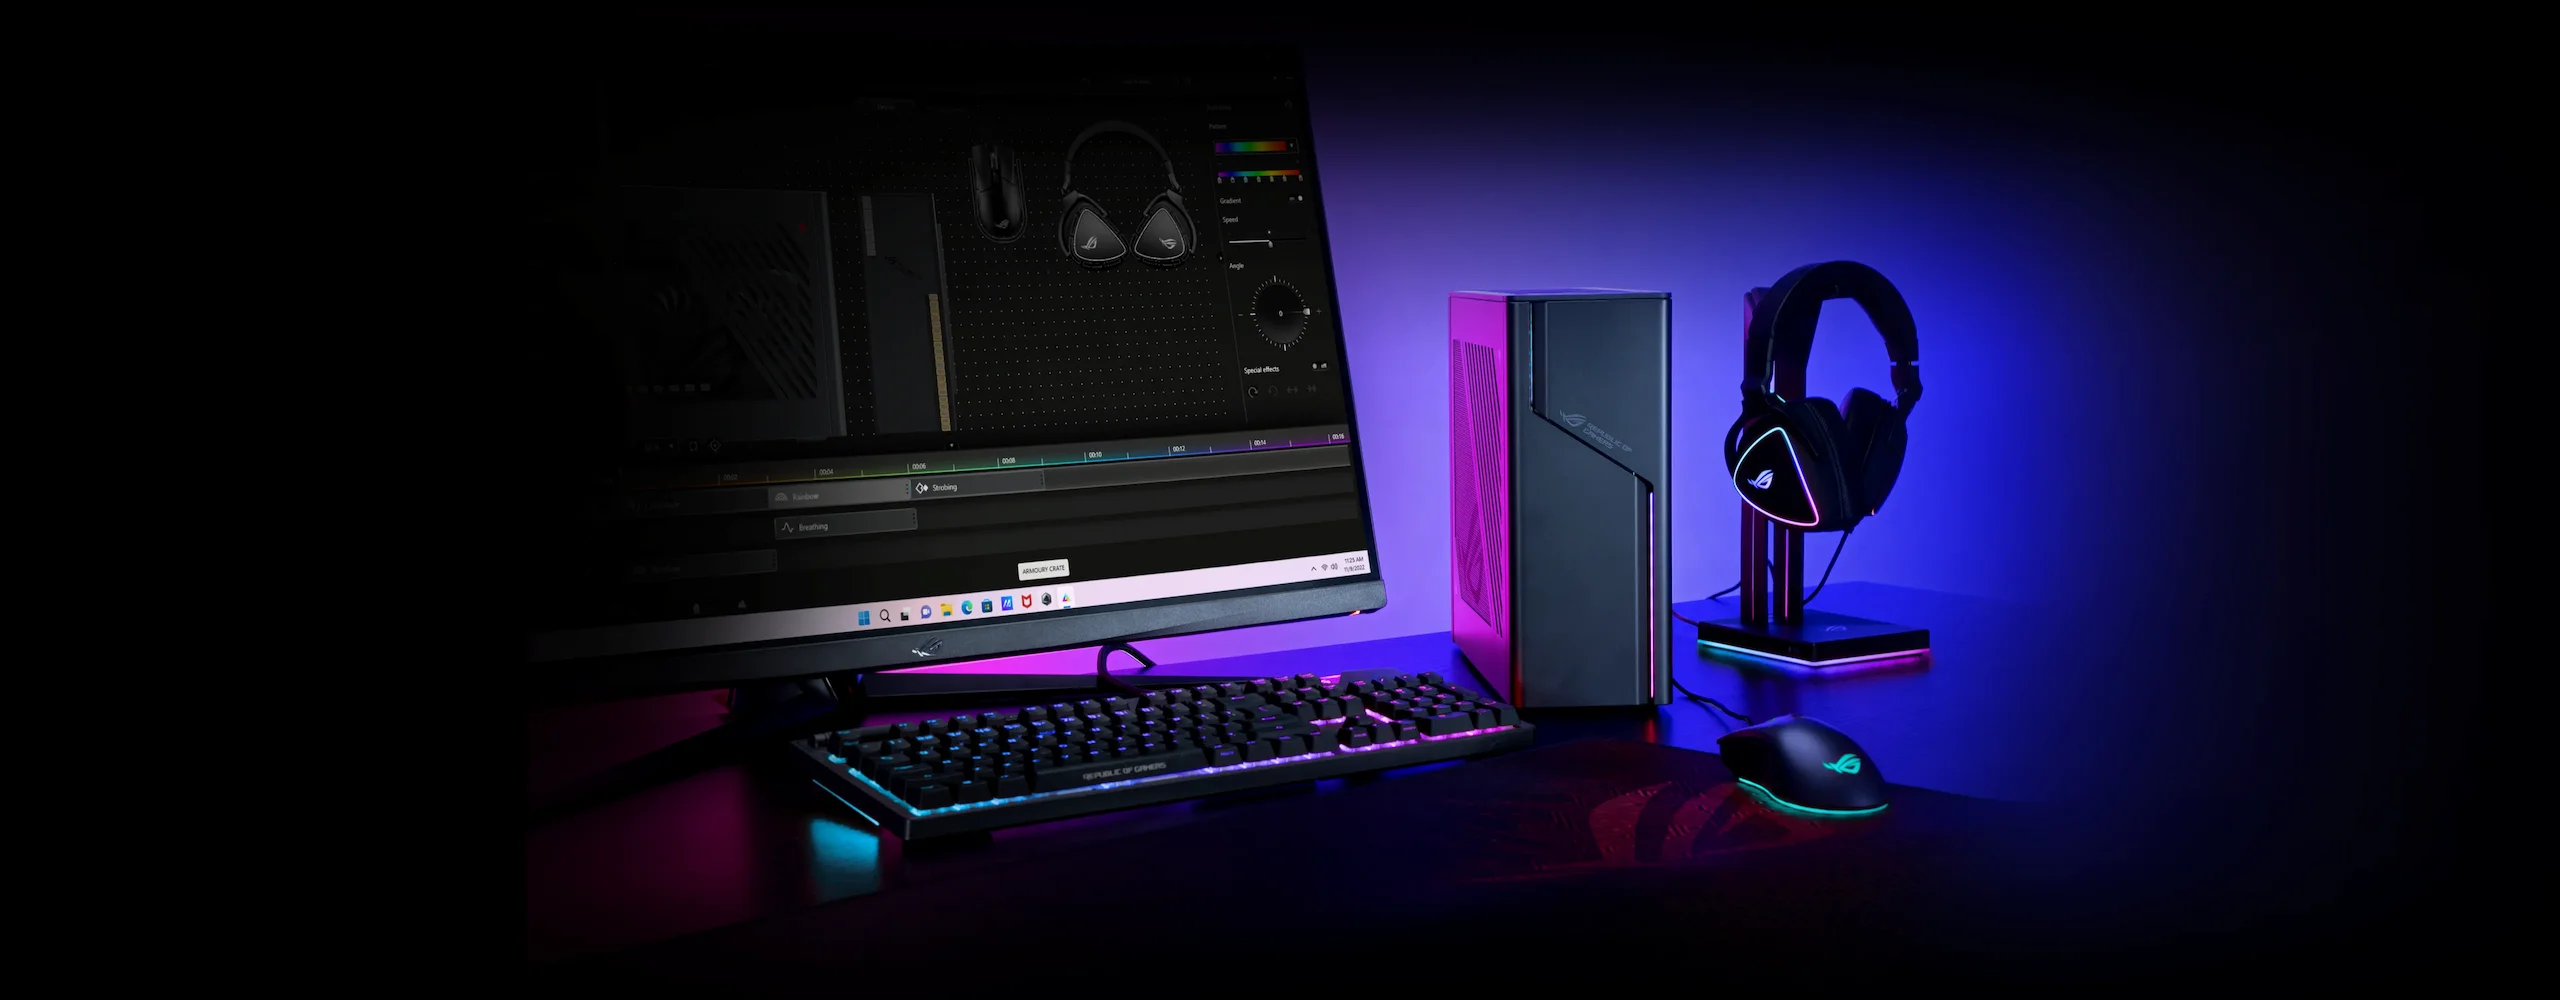 The ROG G22 sitting on a desk next to a gaming monitor, keyboard, mouse, and headset.